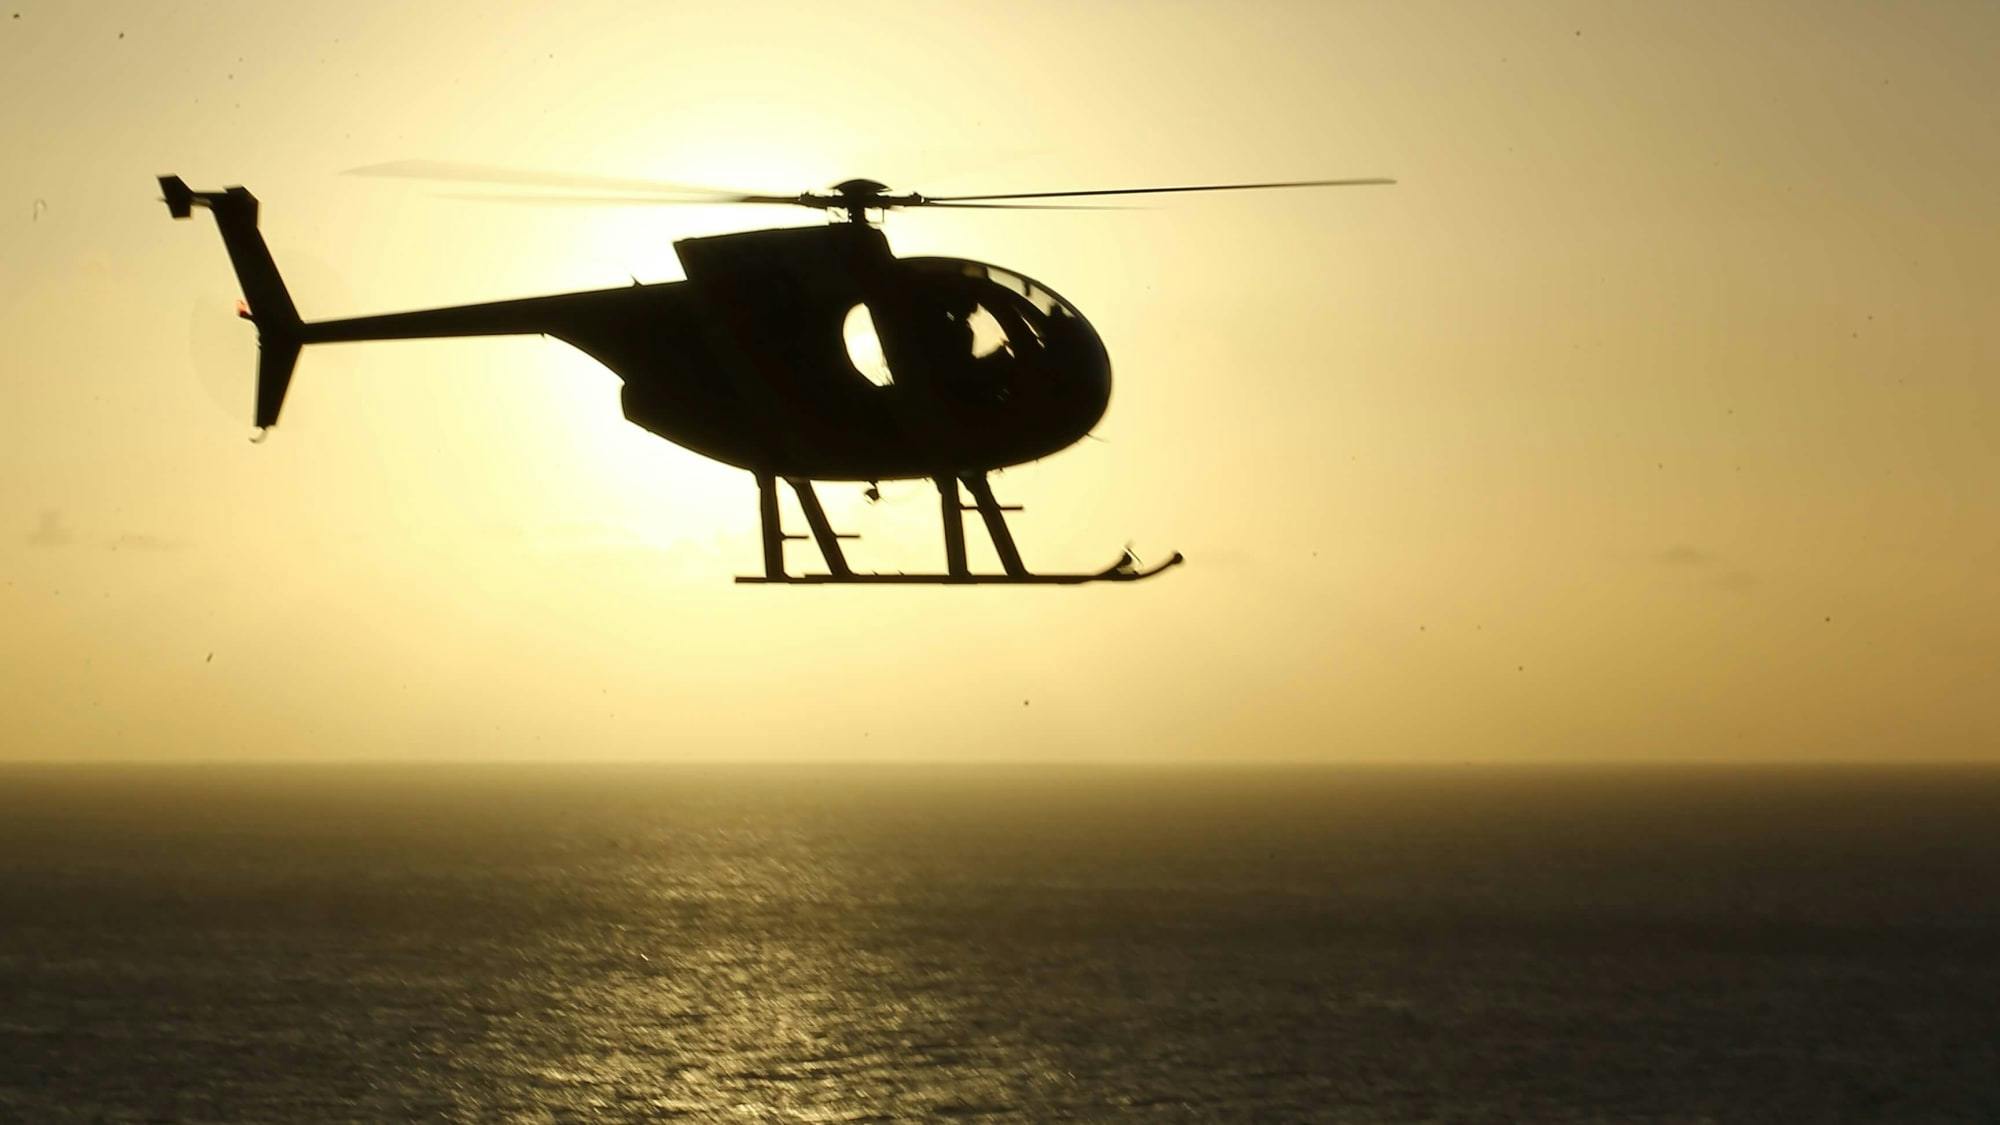 Helicopter flying at sunset